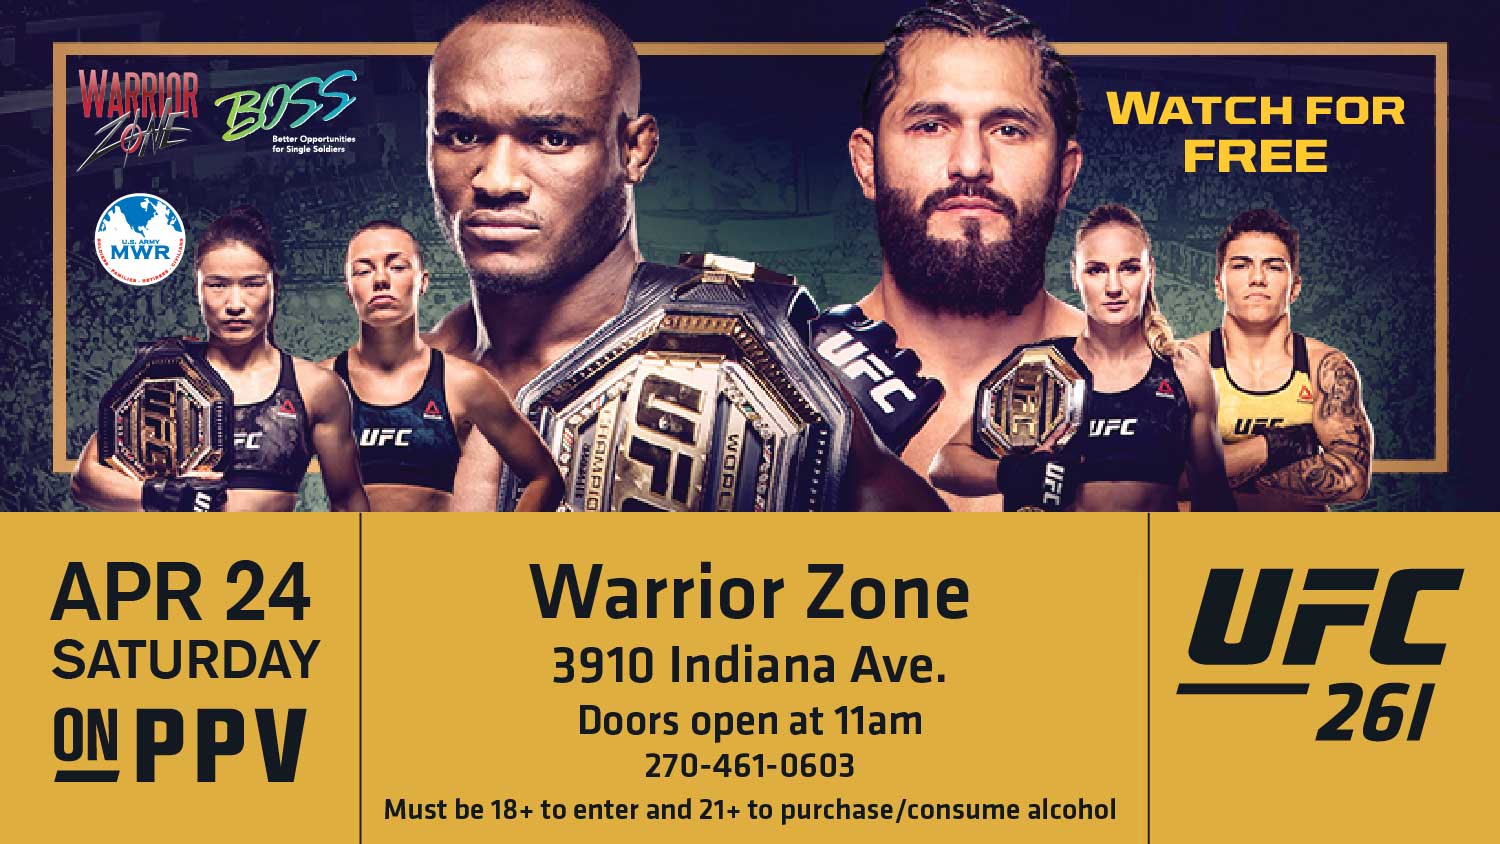 Watch Ufc 261 For Free Factory Sale, SAVE 31%